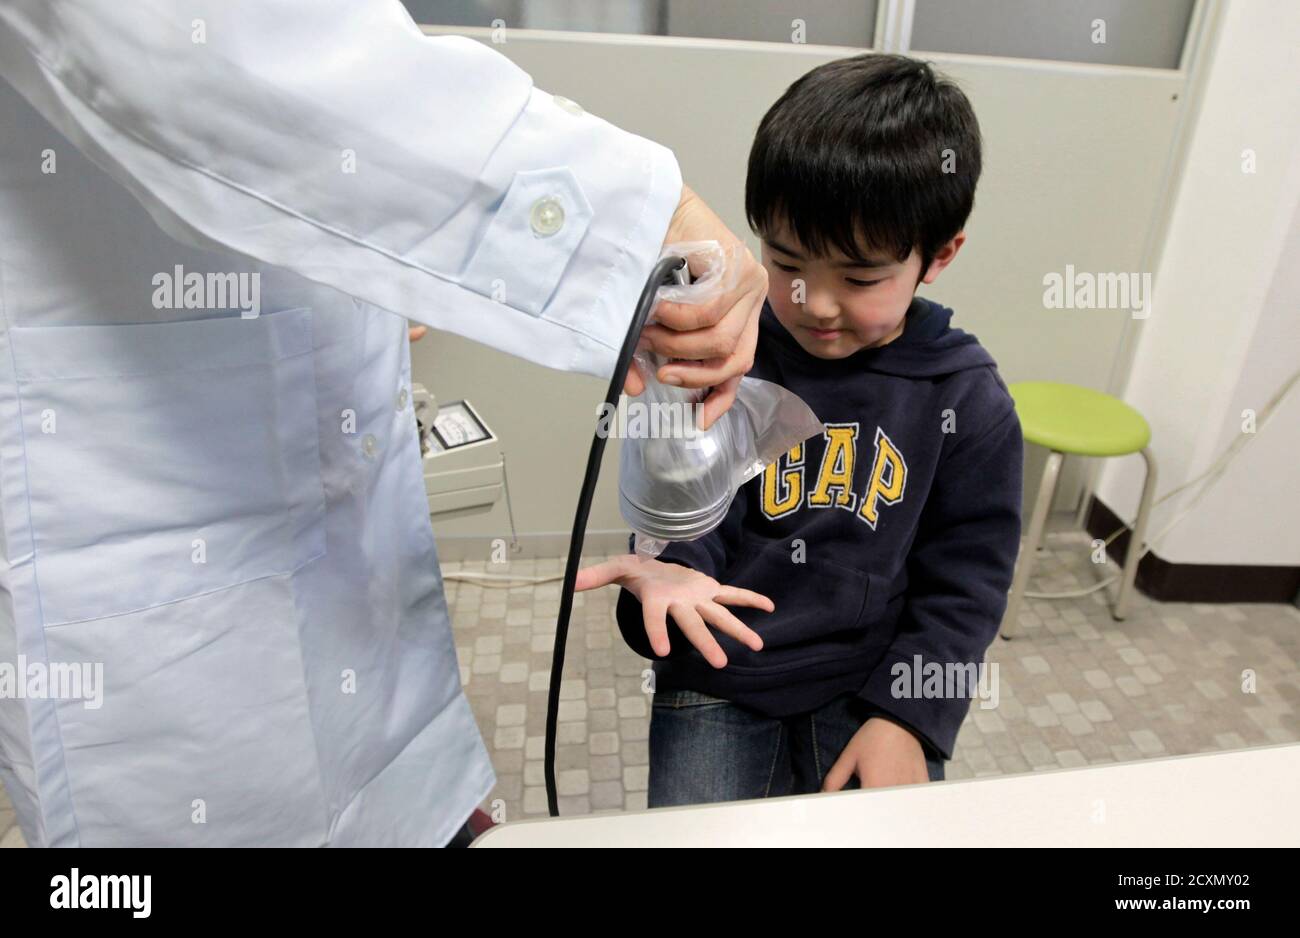 Yuya Sato From Soma In Fukushima Undergoes A Screening Test For Signs Of Nuclear Radiation By A Doctor At A Welfare Center In Yonezawa Northern Japan 98 Km 61 Miles From The